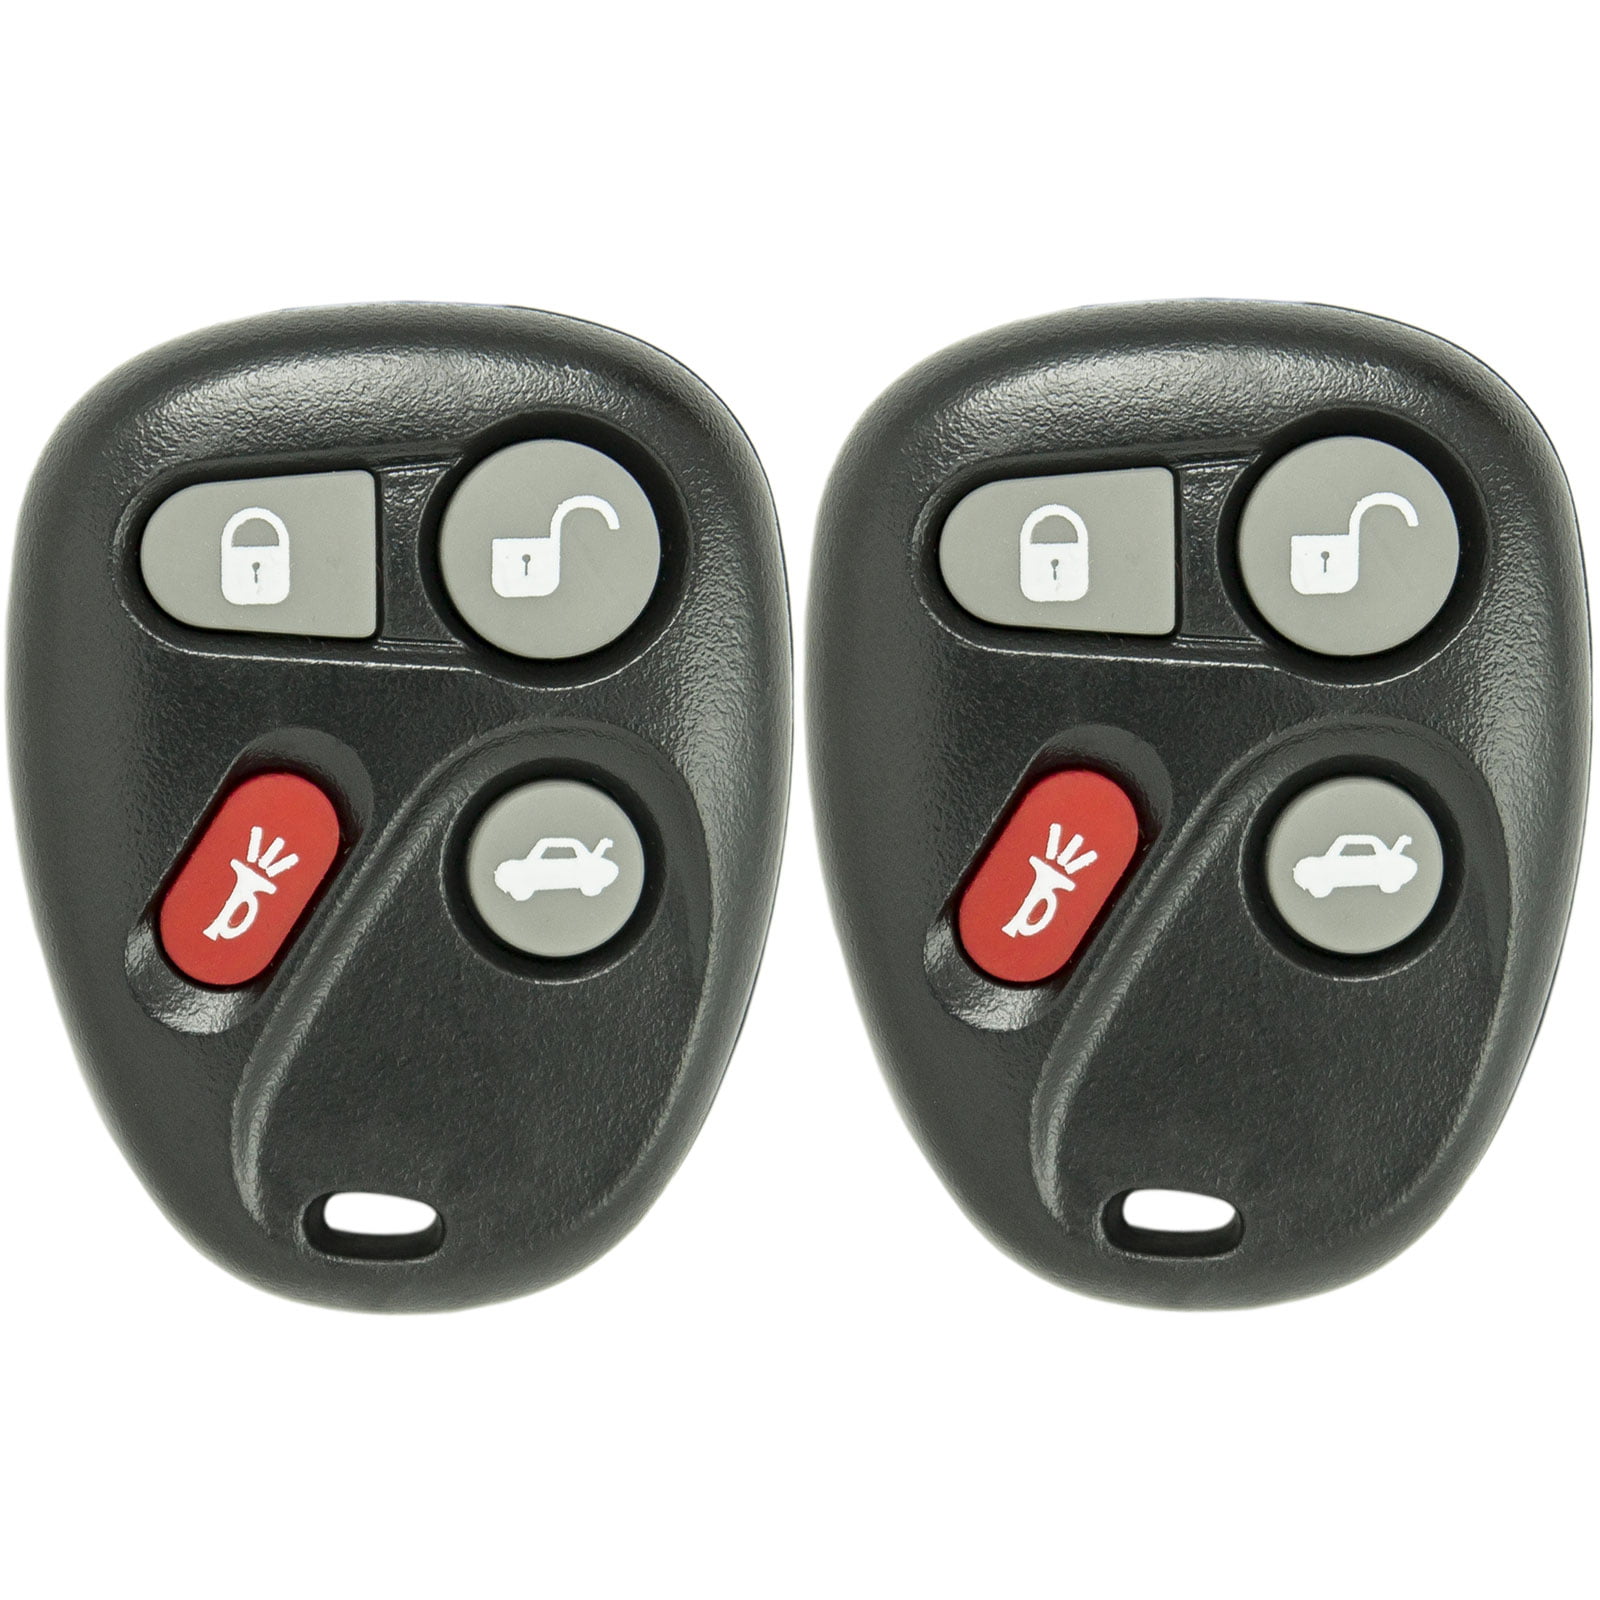 NEW Keyless Entry Key Fob Remote For a 2000 Pontiac Sunfire 4 Buttons 